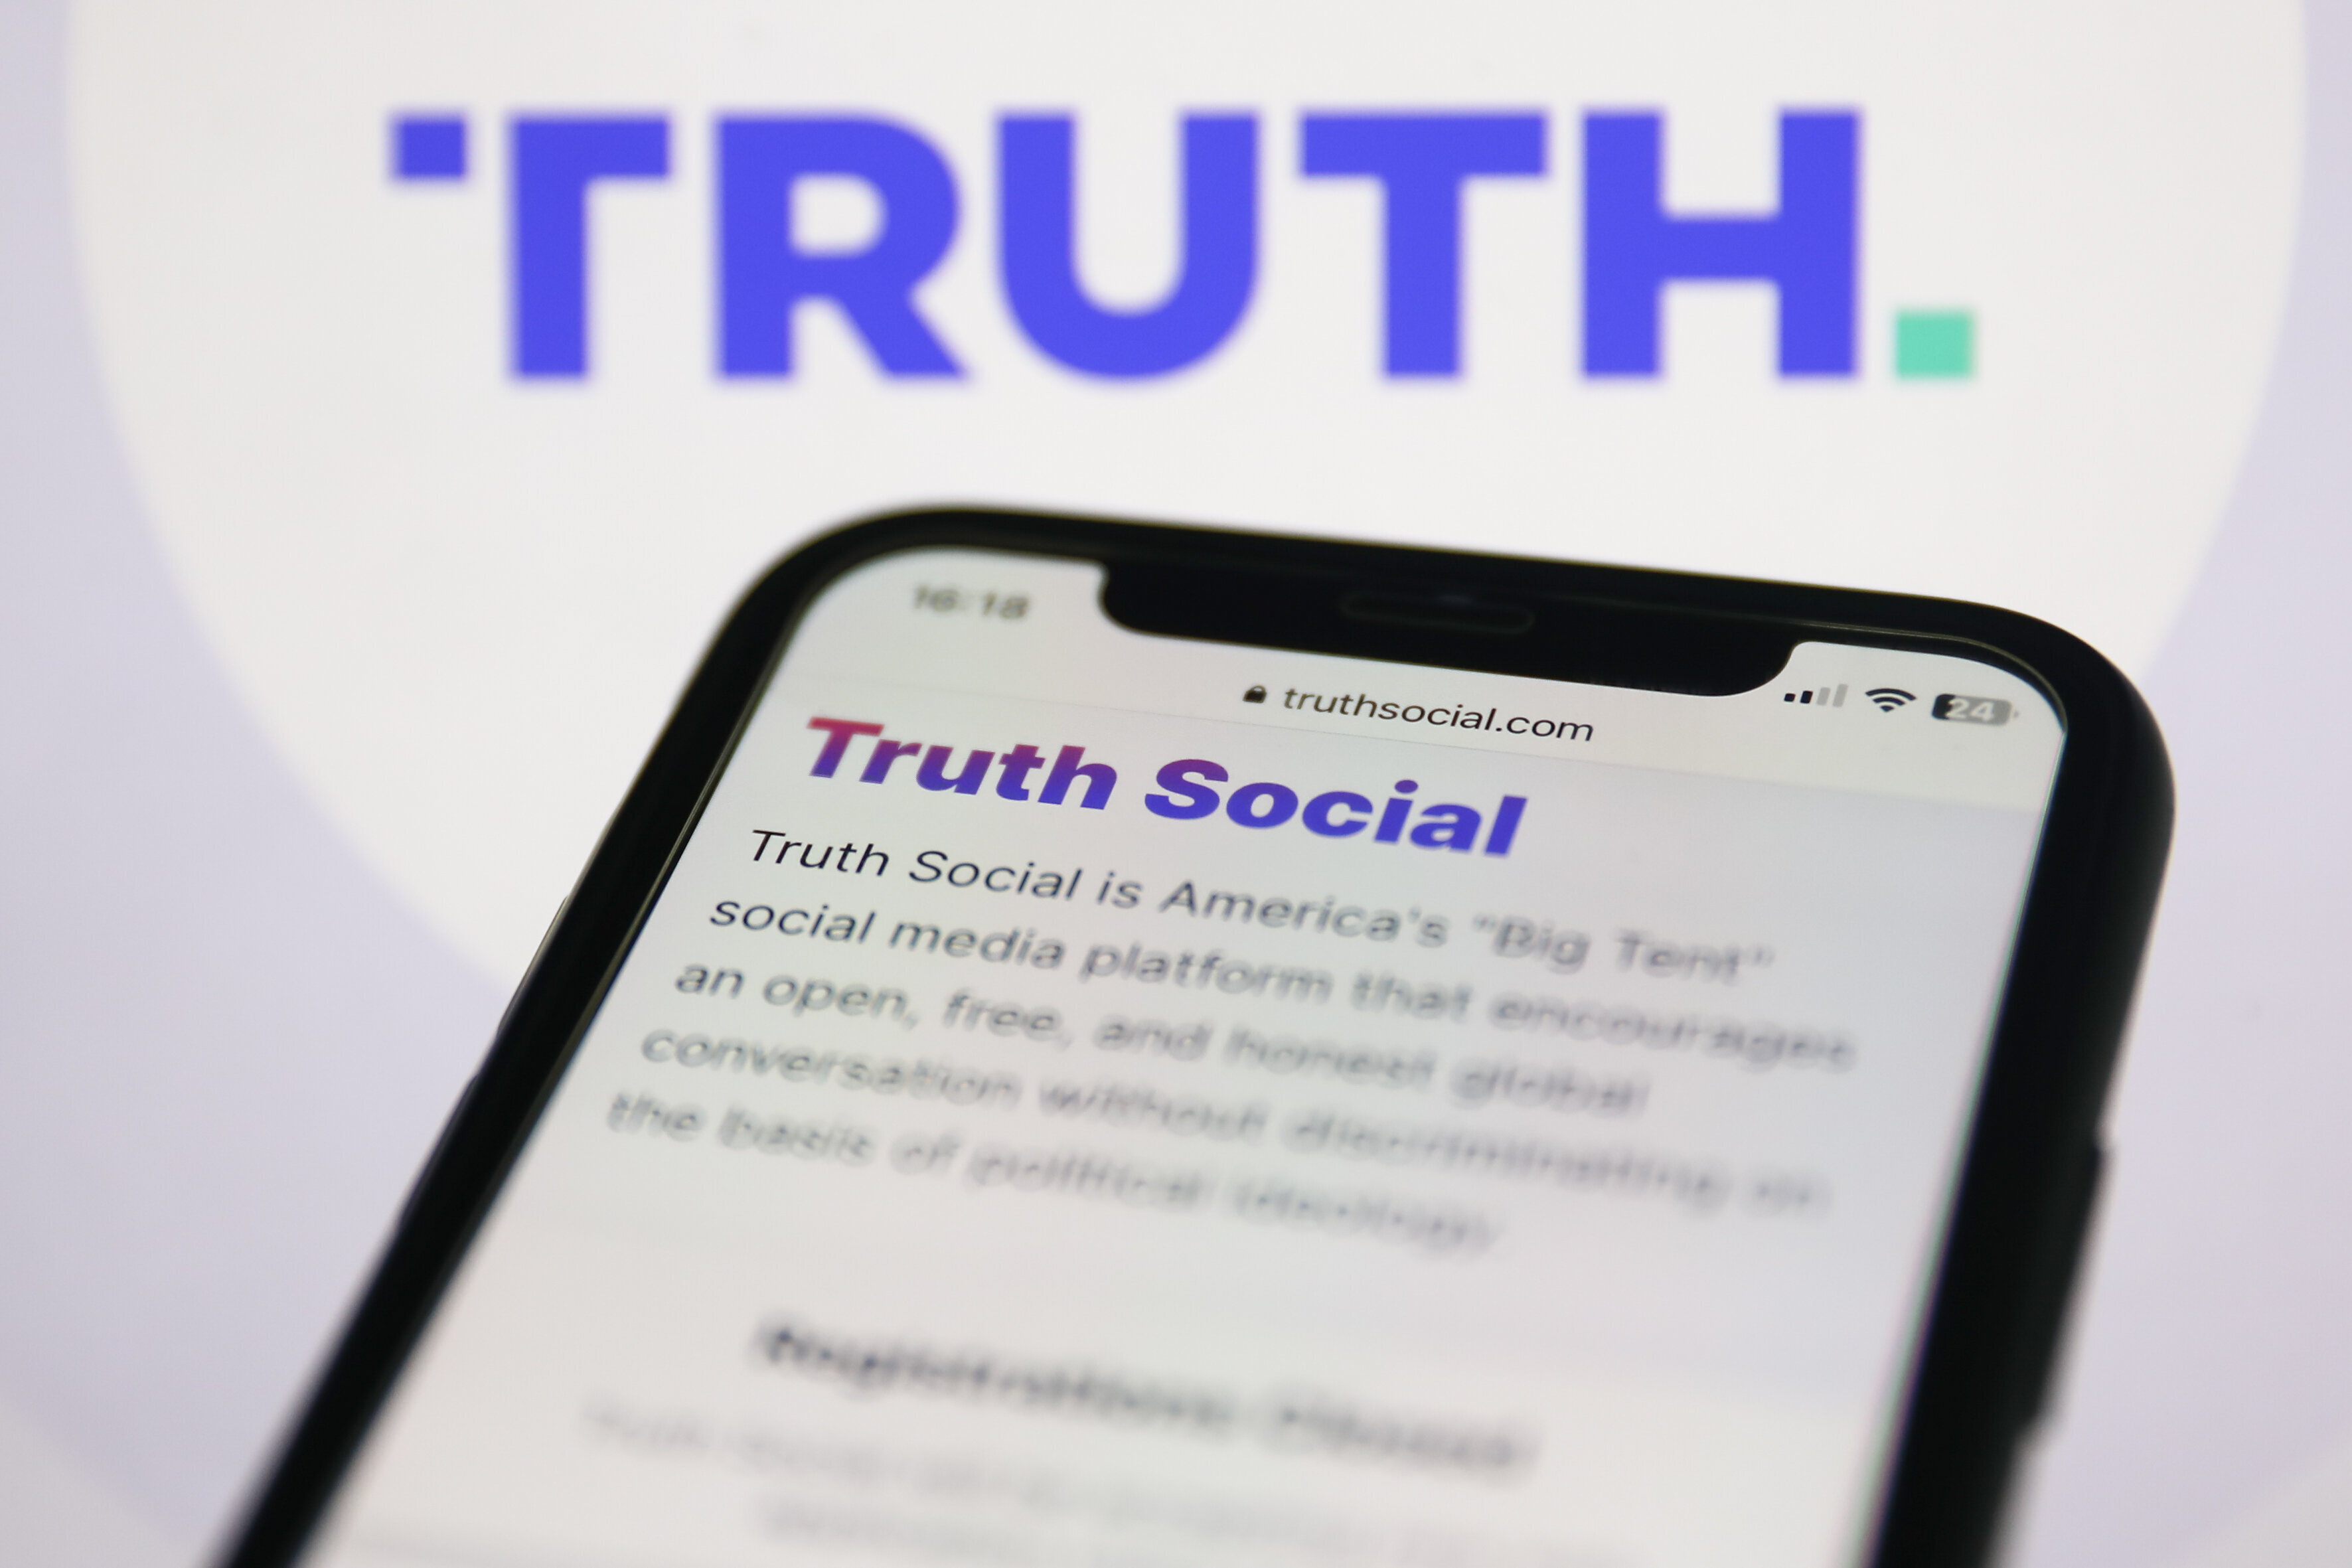 Andy Litinsky and Wes Moss, who co-founded Trump’s Truth Social platform, have alleged that their 8.6% stake in Trump Media & Technology Group has been watered down to less than 1% ahead of a lucrative merger.